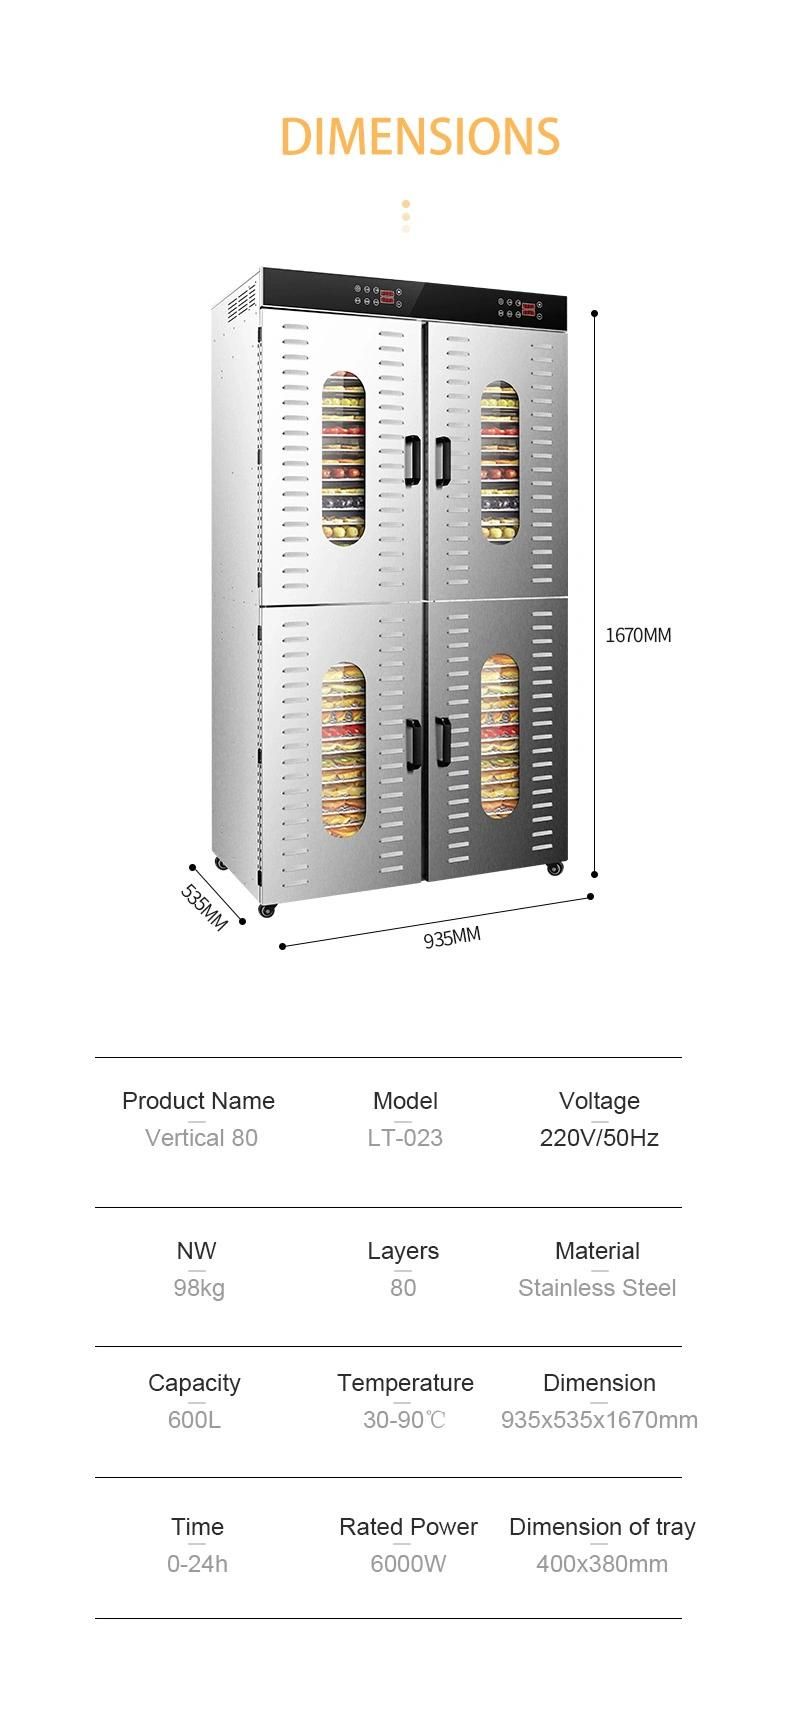 Free MOQ 4 Compartments 80 Trays Commercial Stainless Steel Food Fruits Vegetables Dehydrator Air Dryer Machine Fruit Drying Oven Dewatering Machine Equipment